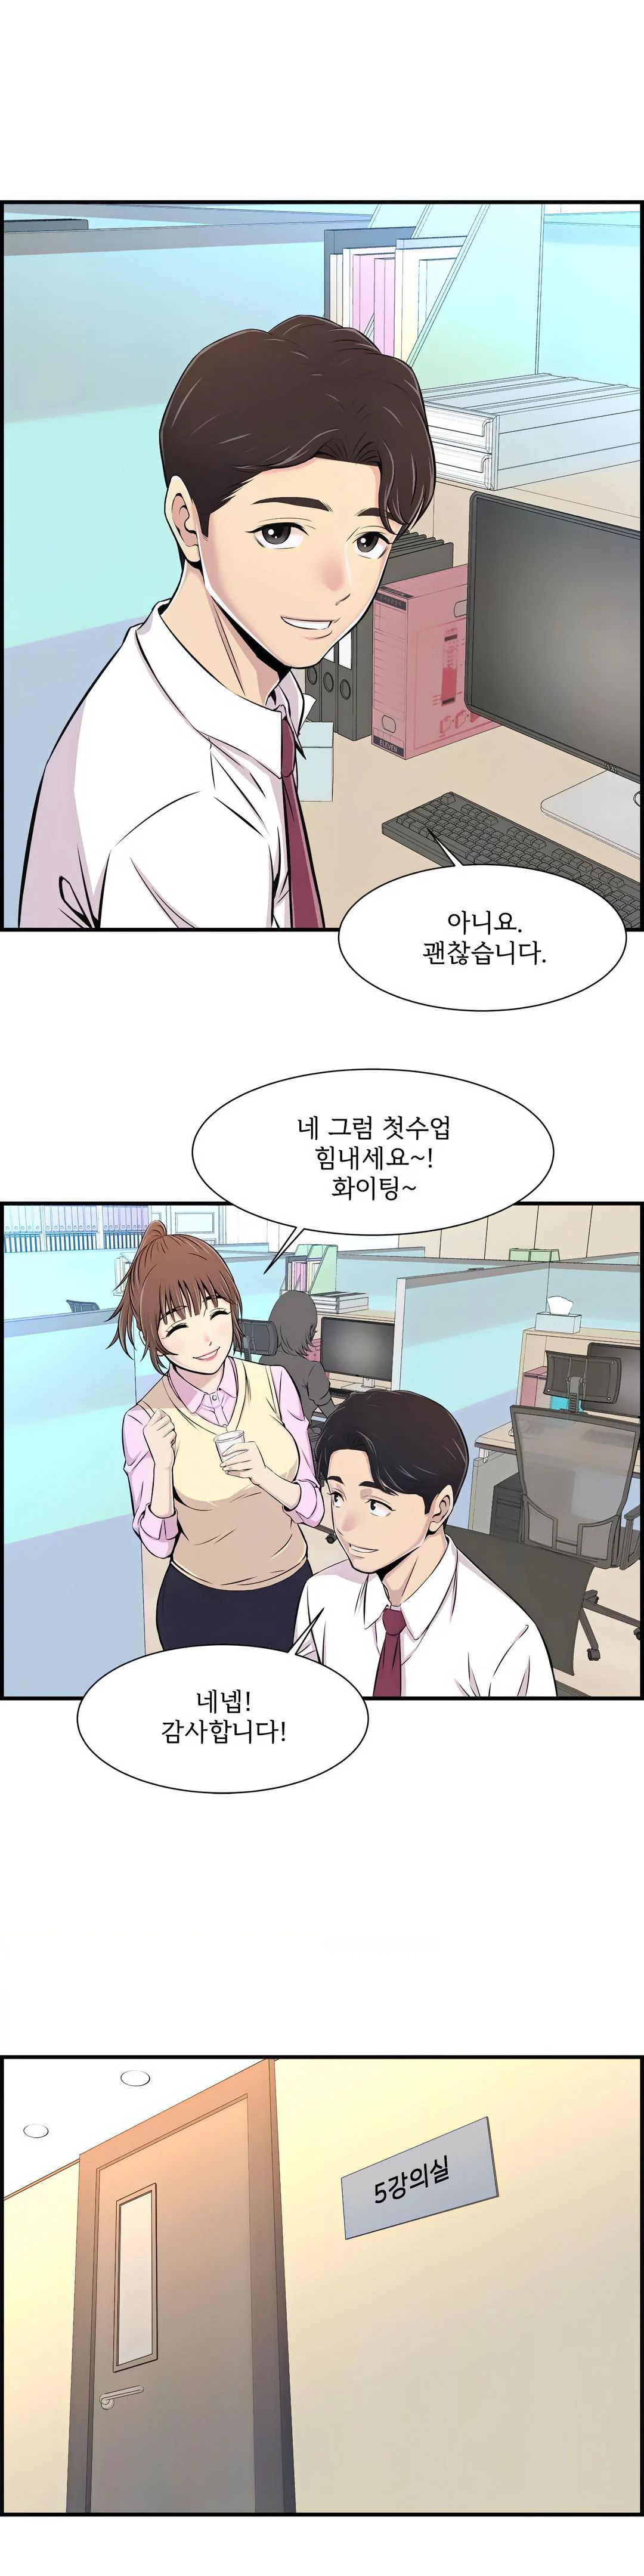 Cram School Scandal Raw - Chapter 1 Page 23